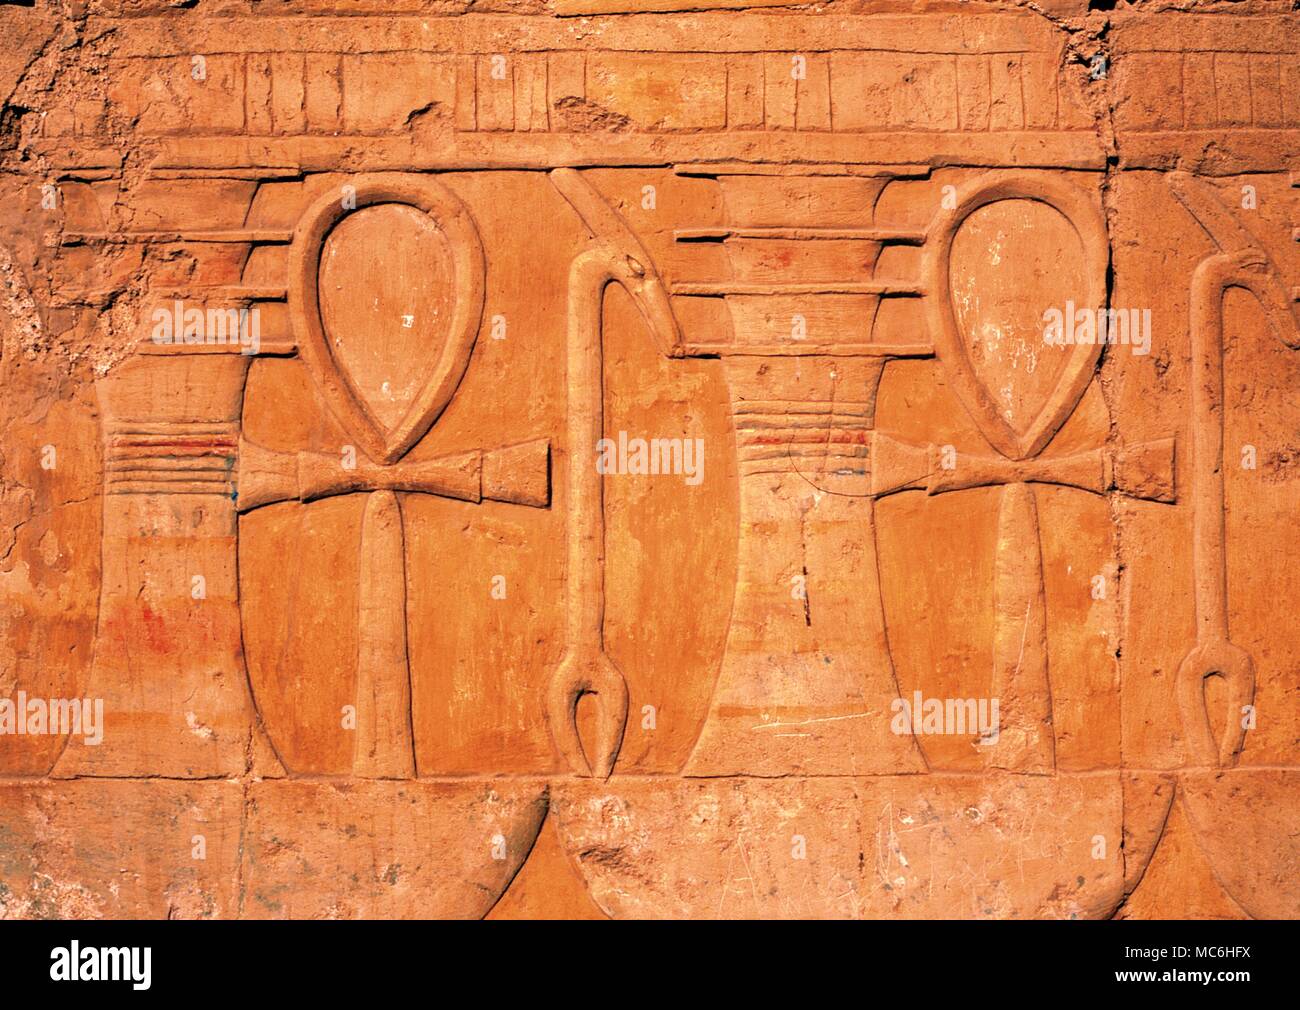 Magic symbols. Painted bas-relief images of the sacred Ankh (The life force), inthe Hathor Temple of Hapshepsut, Luxor .Egypt. Stock Photo